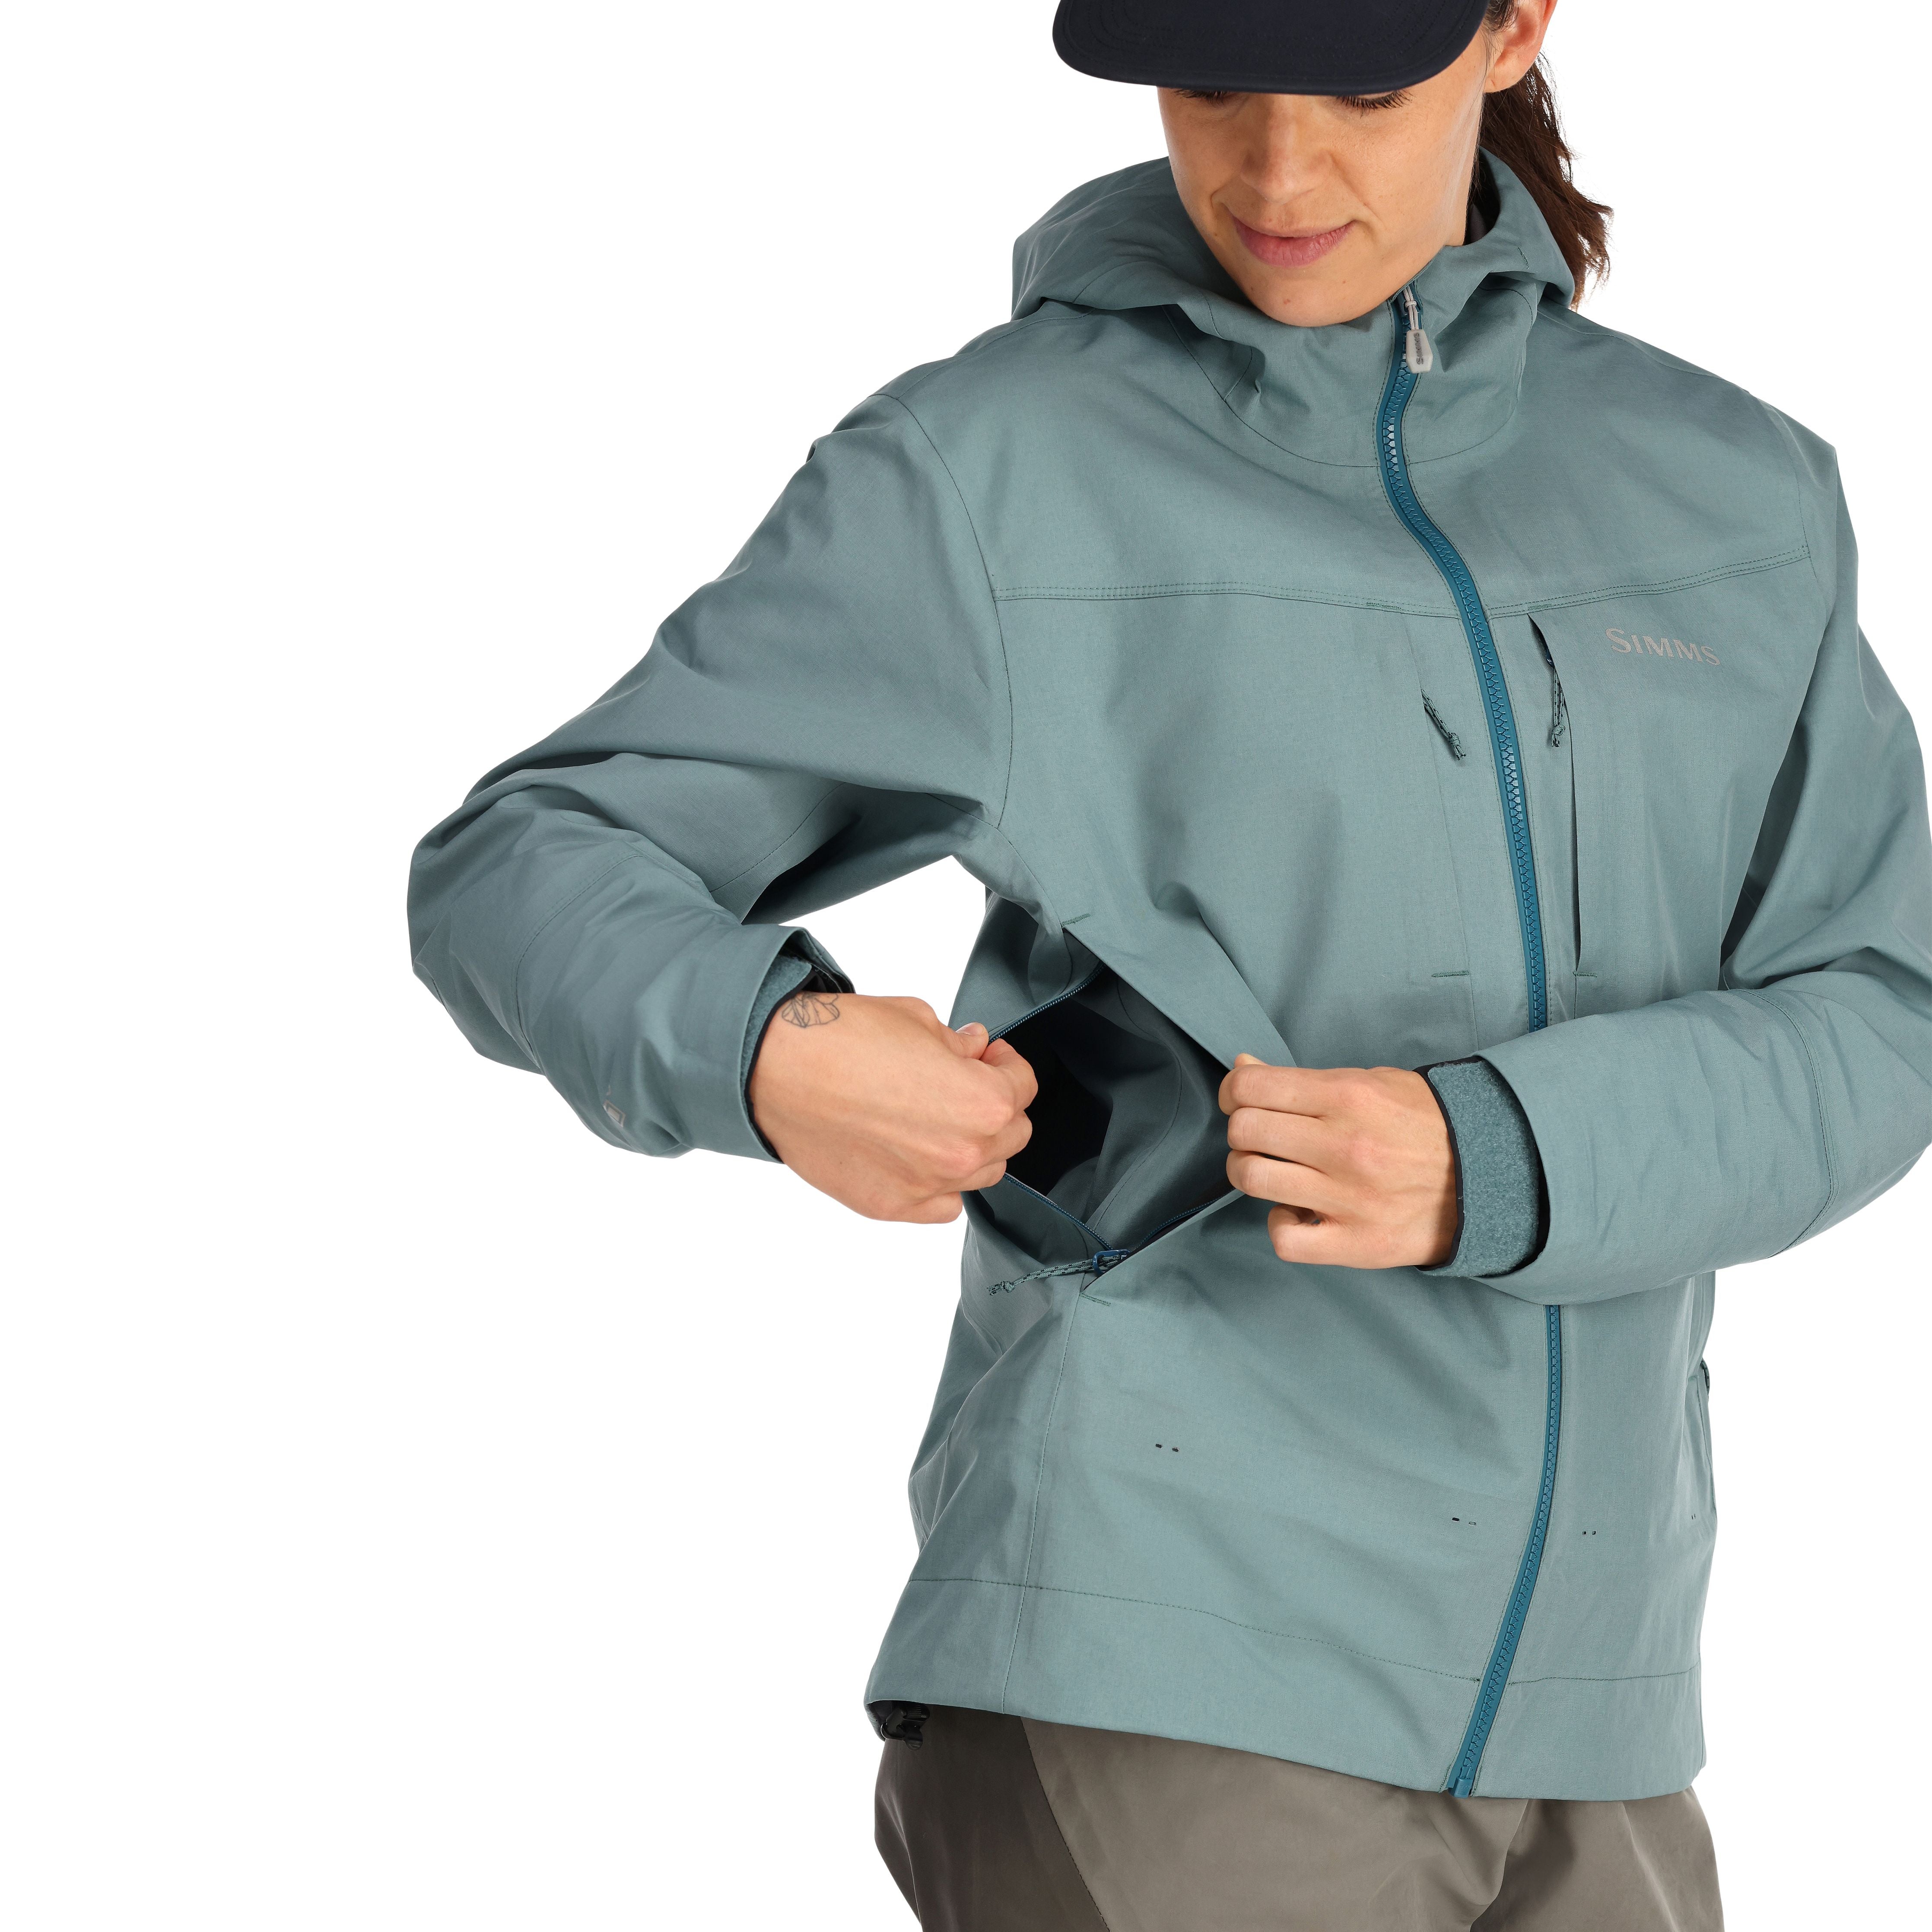 Simms Women's G3 Guide Jacket Avalon Teal Image 07